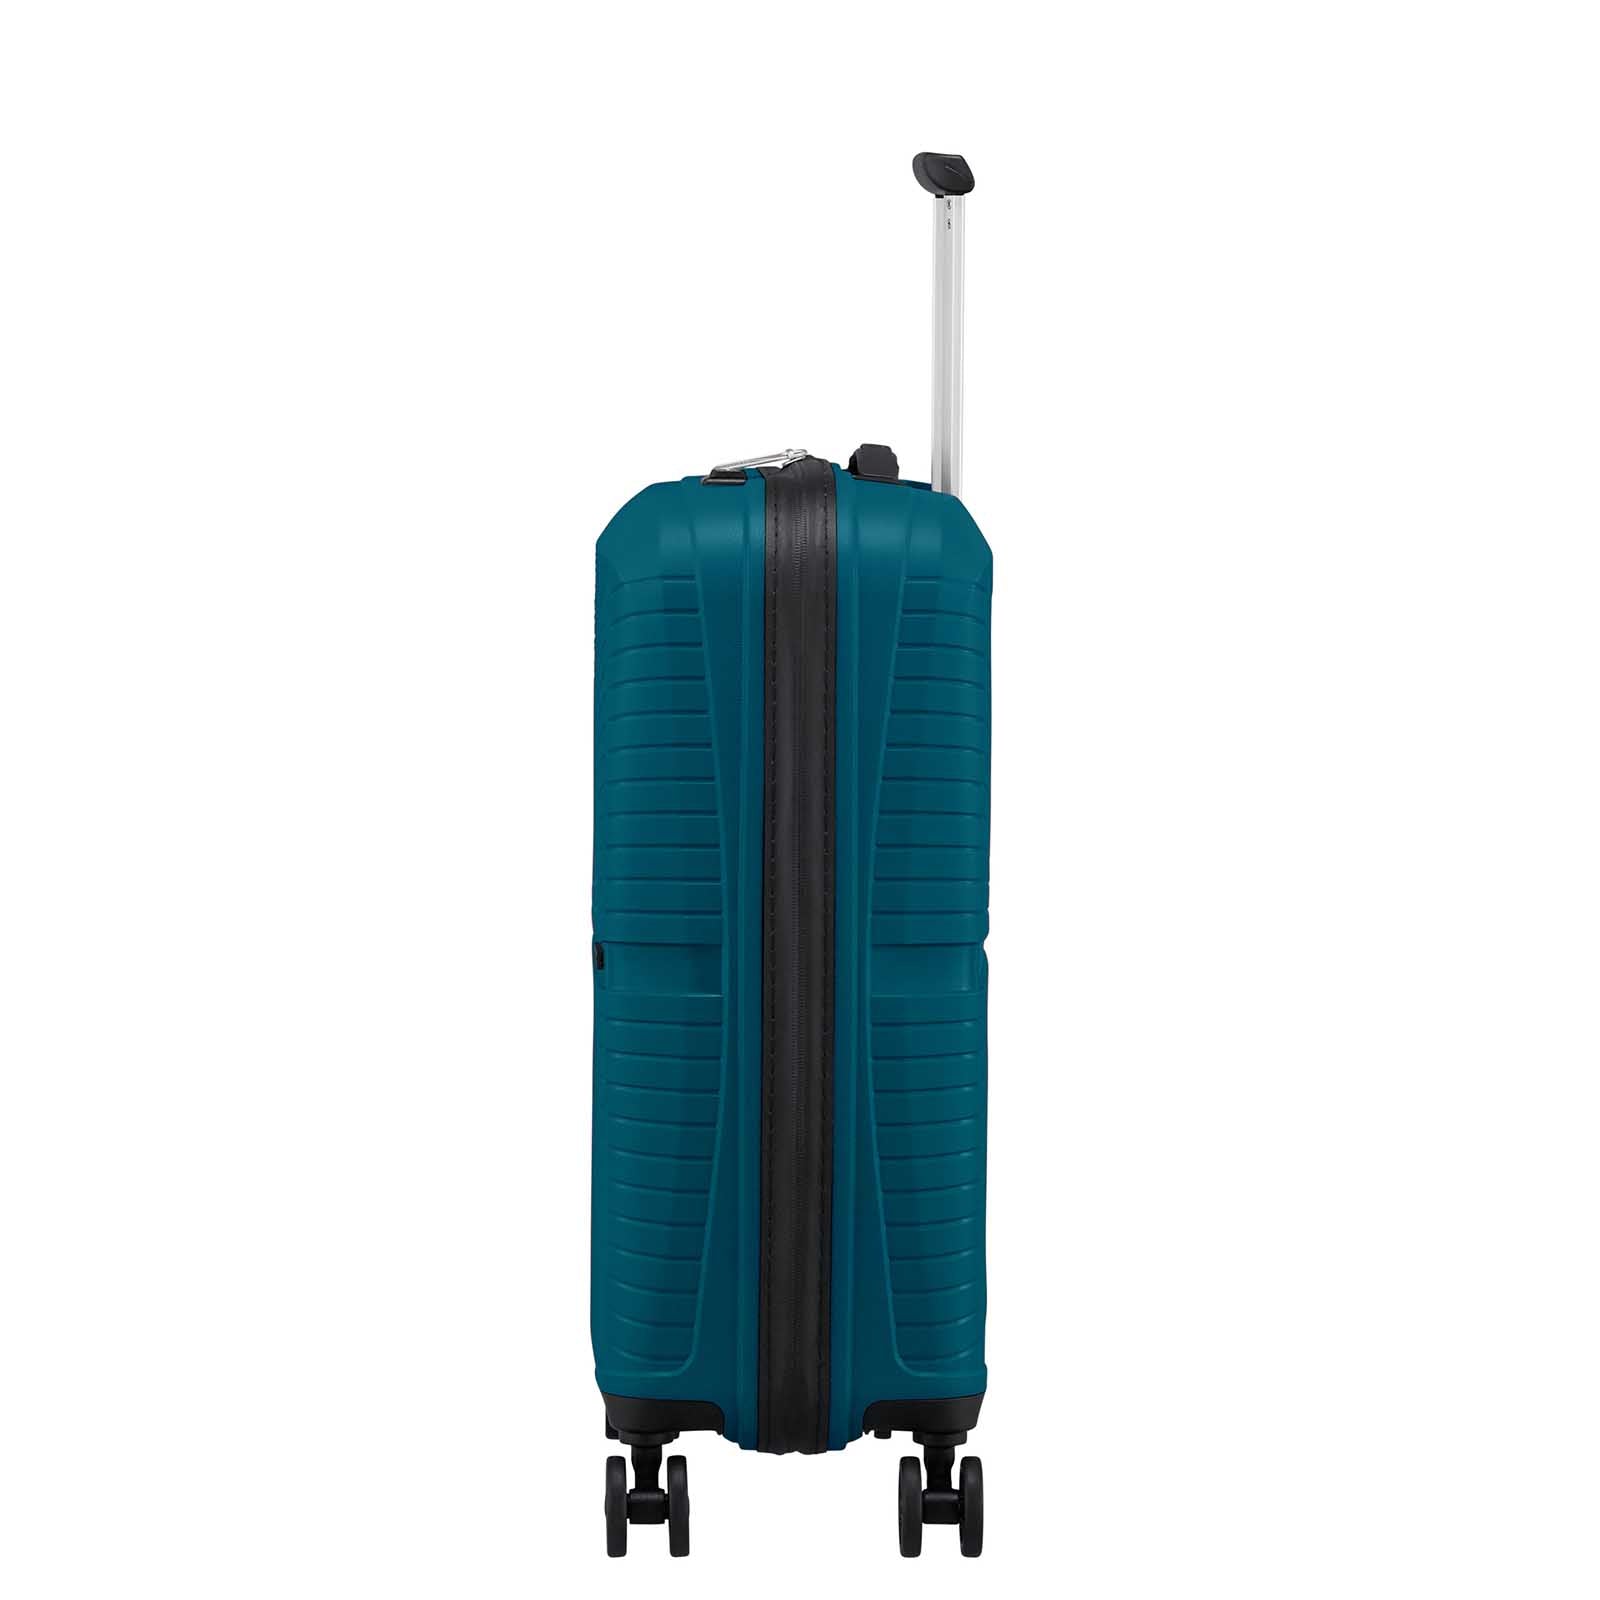 American-Tourister-Airconic-55cm-Carry-On-Suitcase-Deep-Ocean-Side-RH